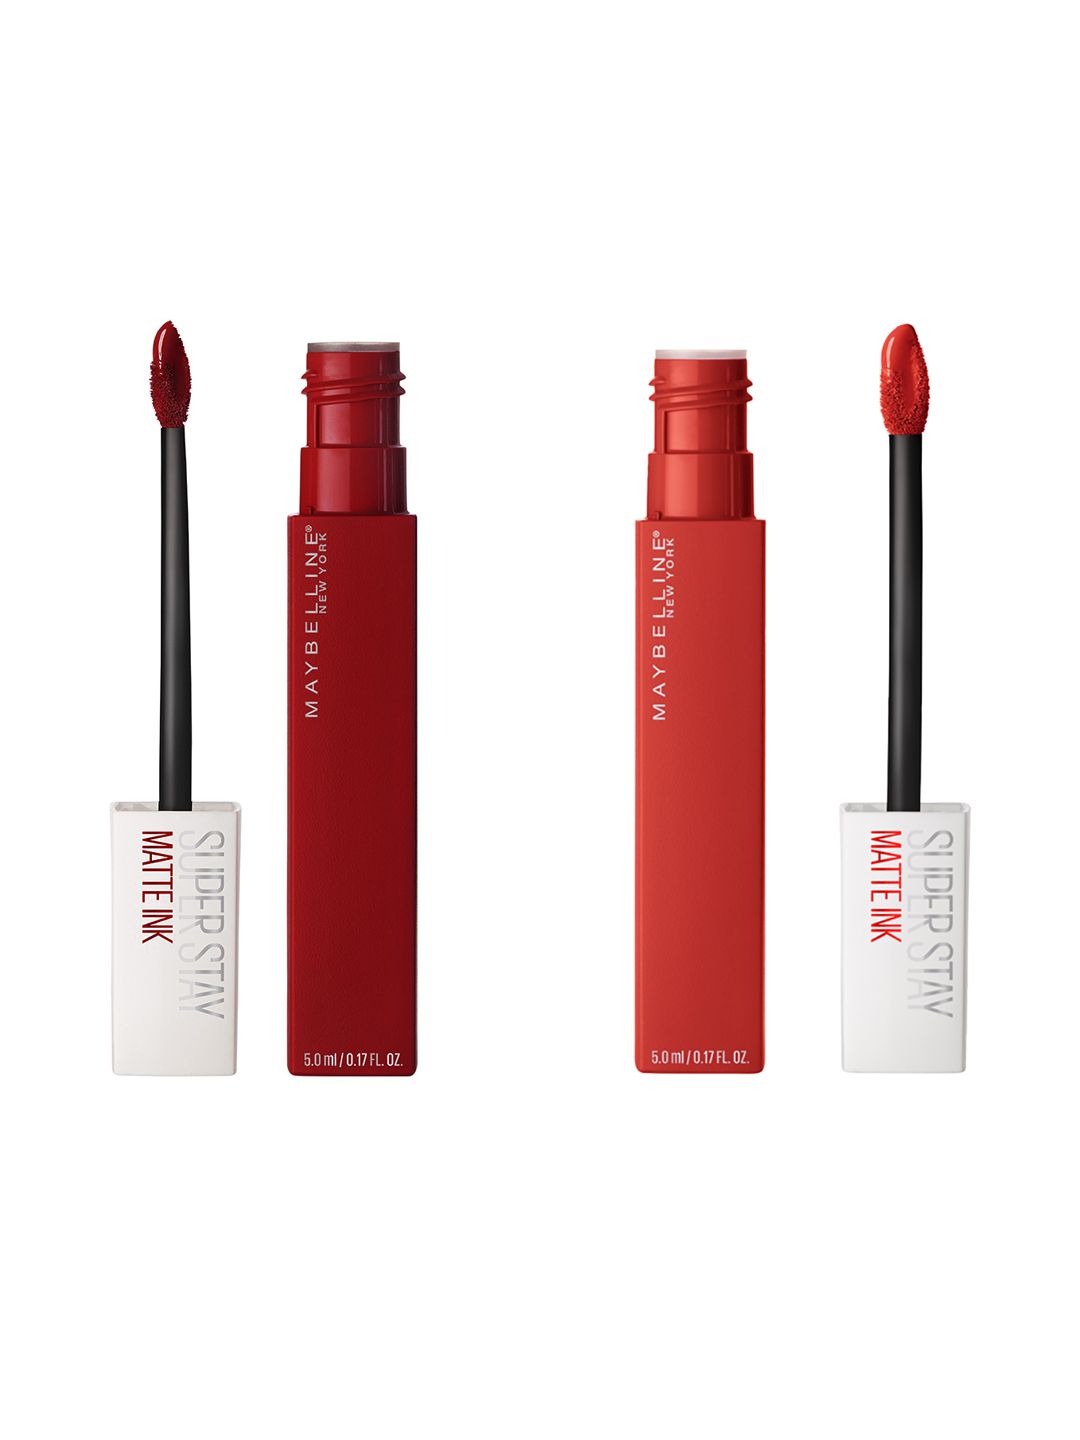 Maybelline New York Super Stay Set Of 2 Matte Ink Liquid Lipstick Price in India